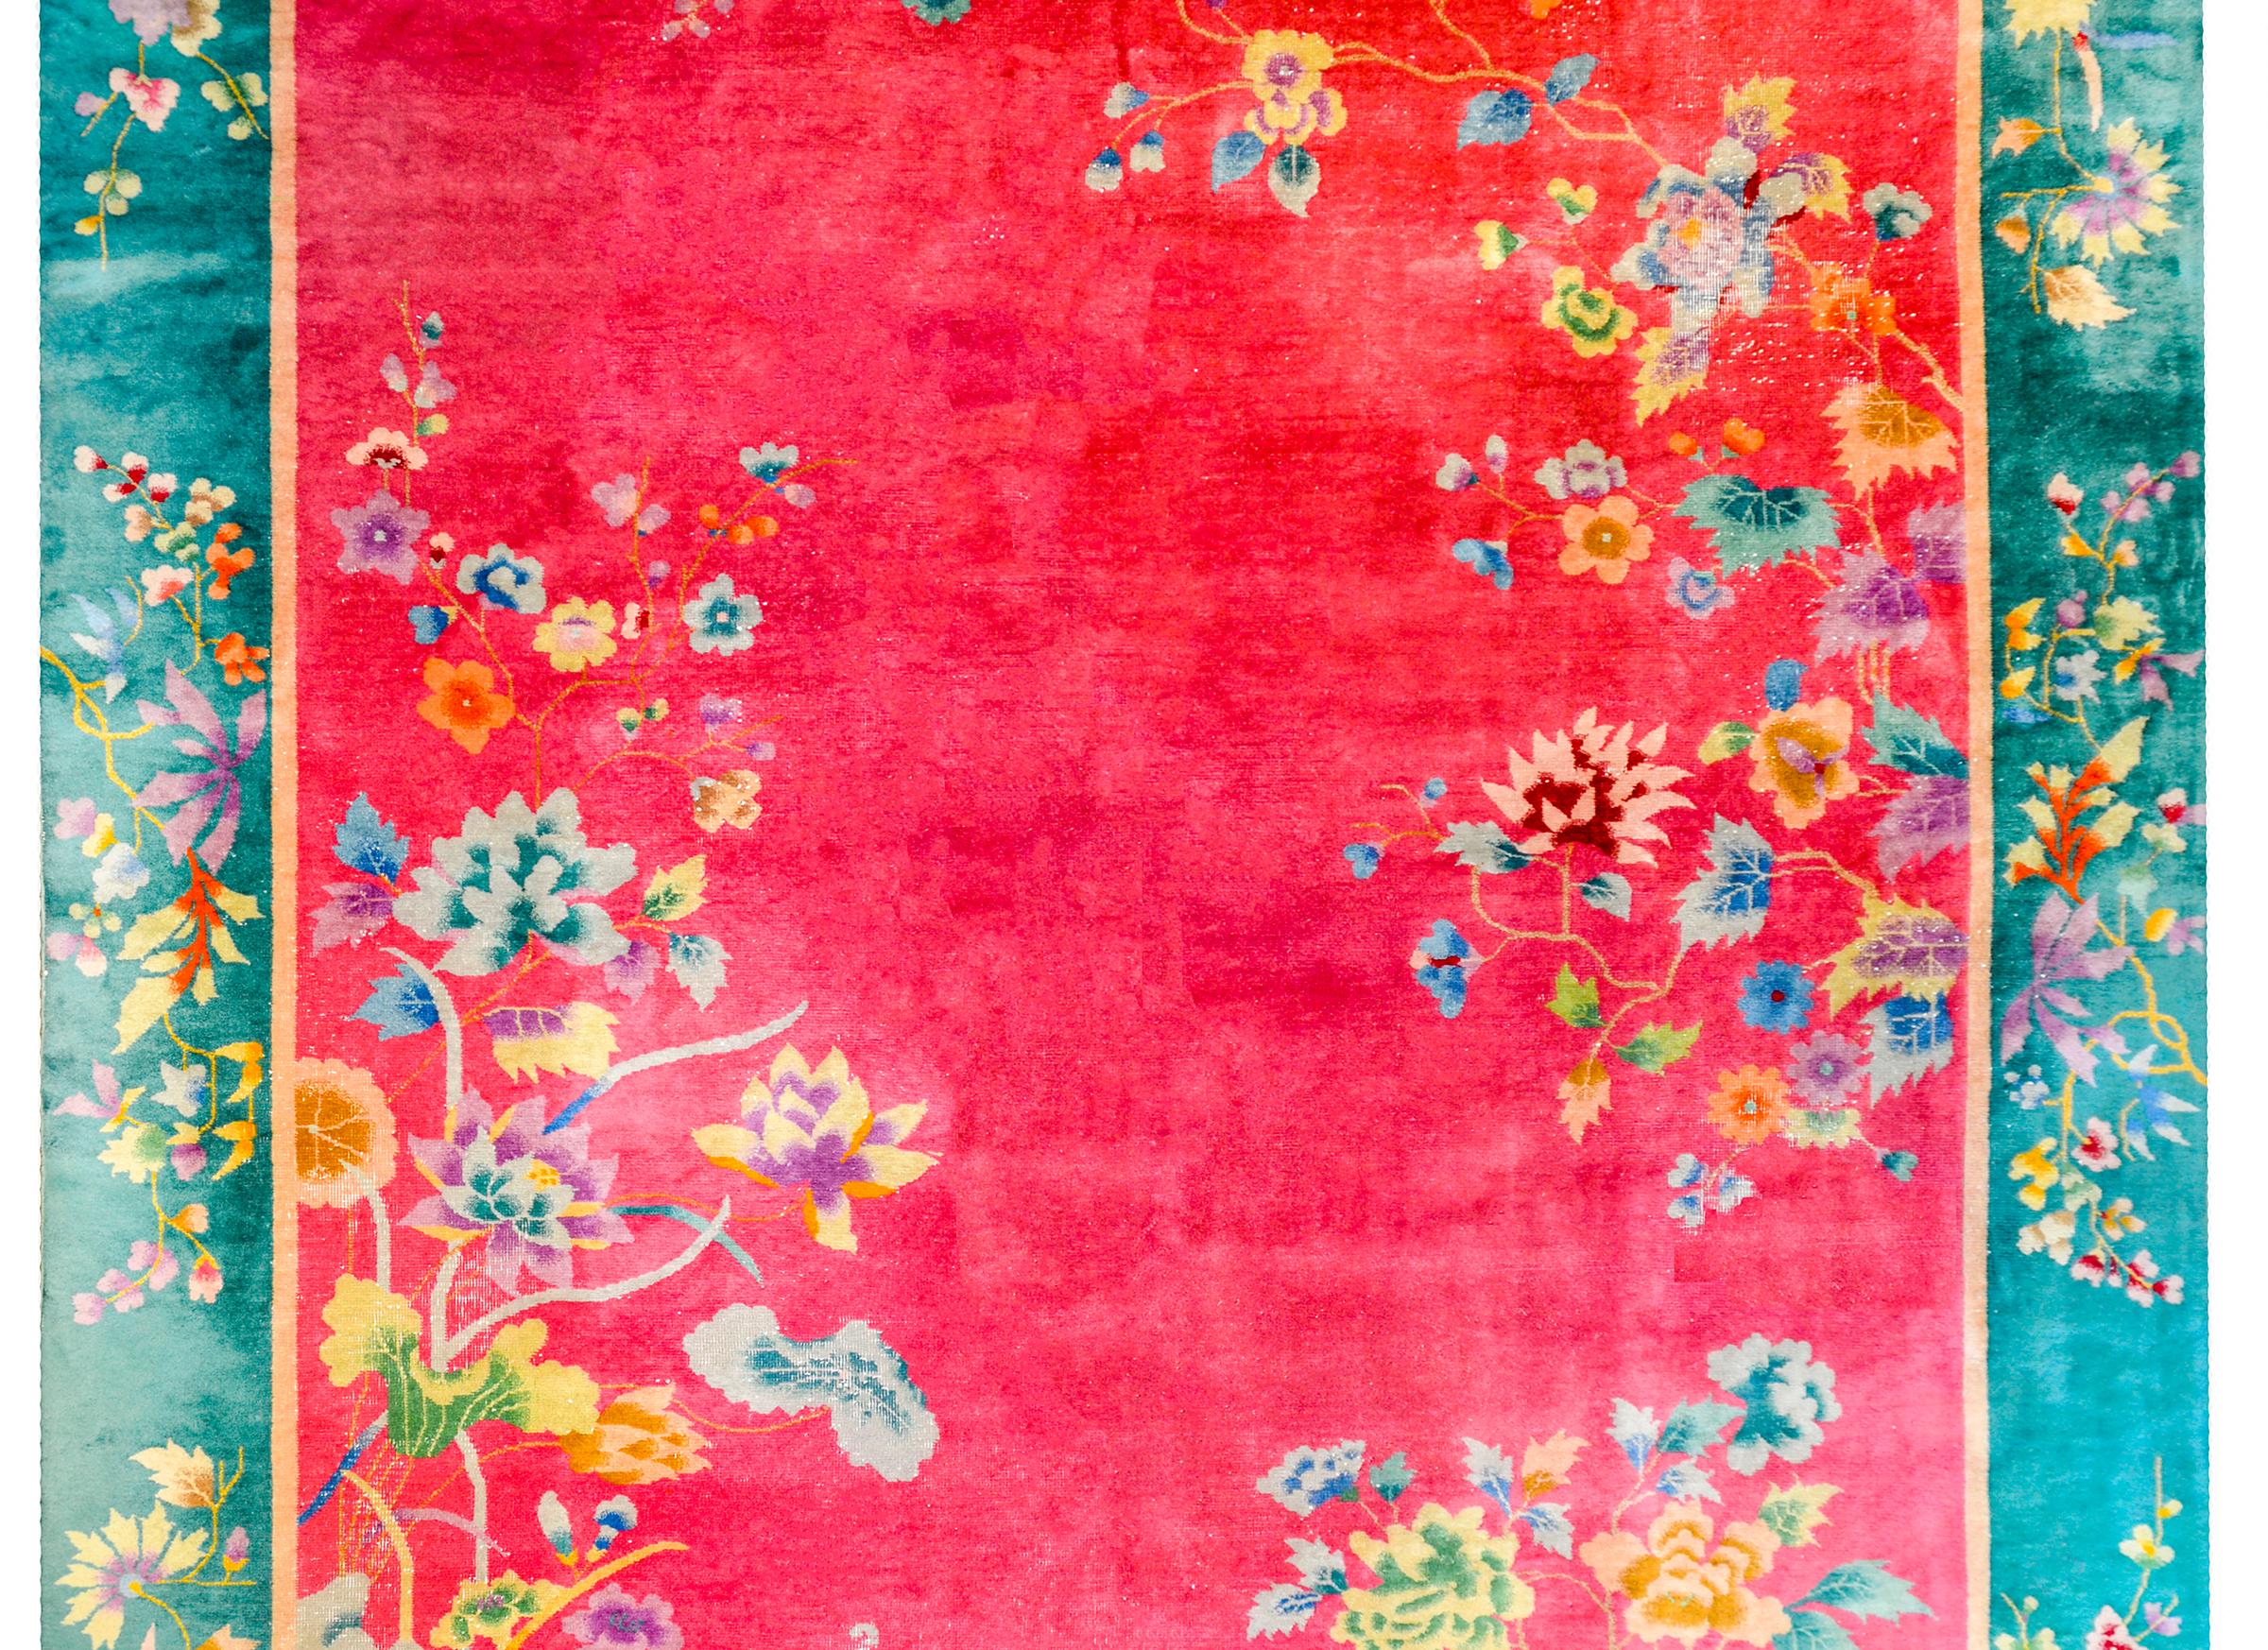 A brilliant early 20th century Chinese Art Deco rug with a bright fuchsia field with a scholar's rock in the lower left corner with multicolored lotus blossoms and large leaves, a potted tree peony in the lower right corner, and a blossoming prunus